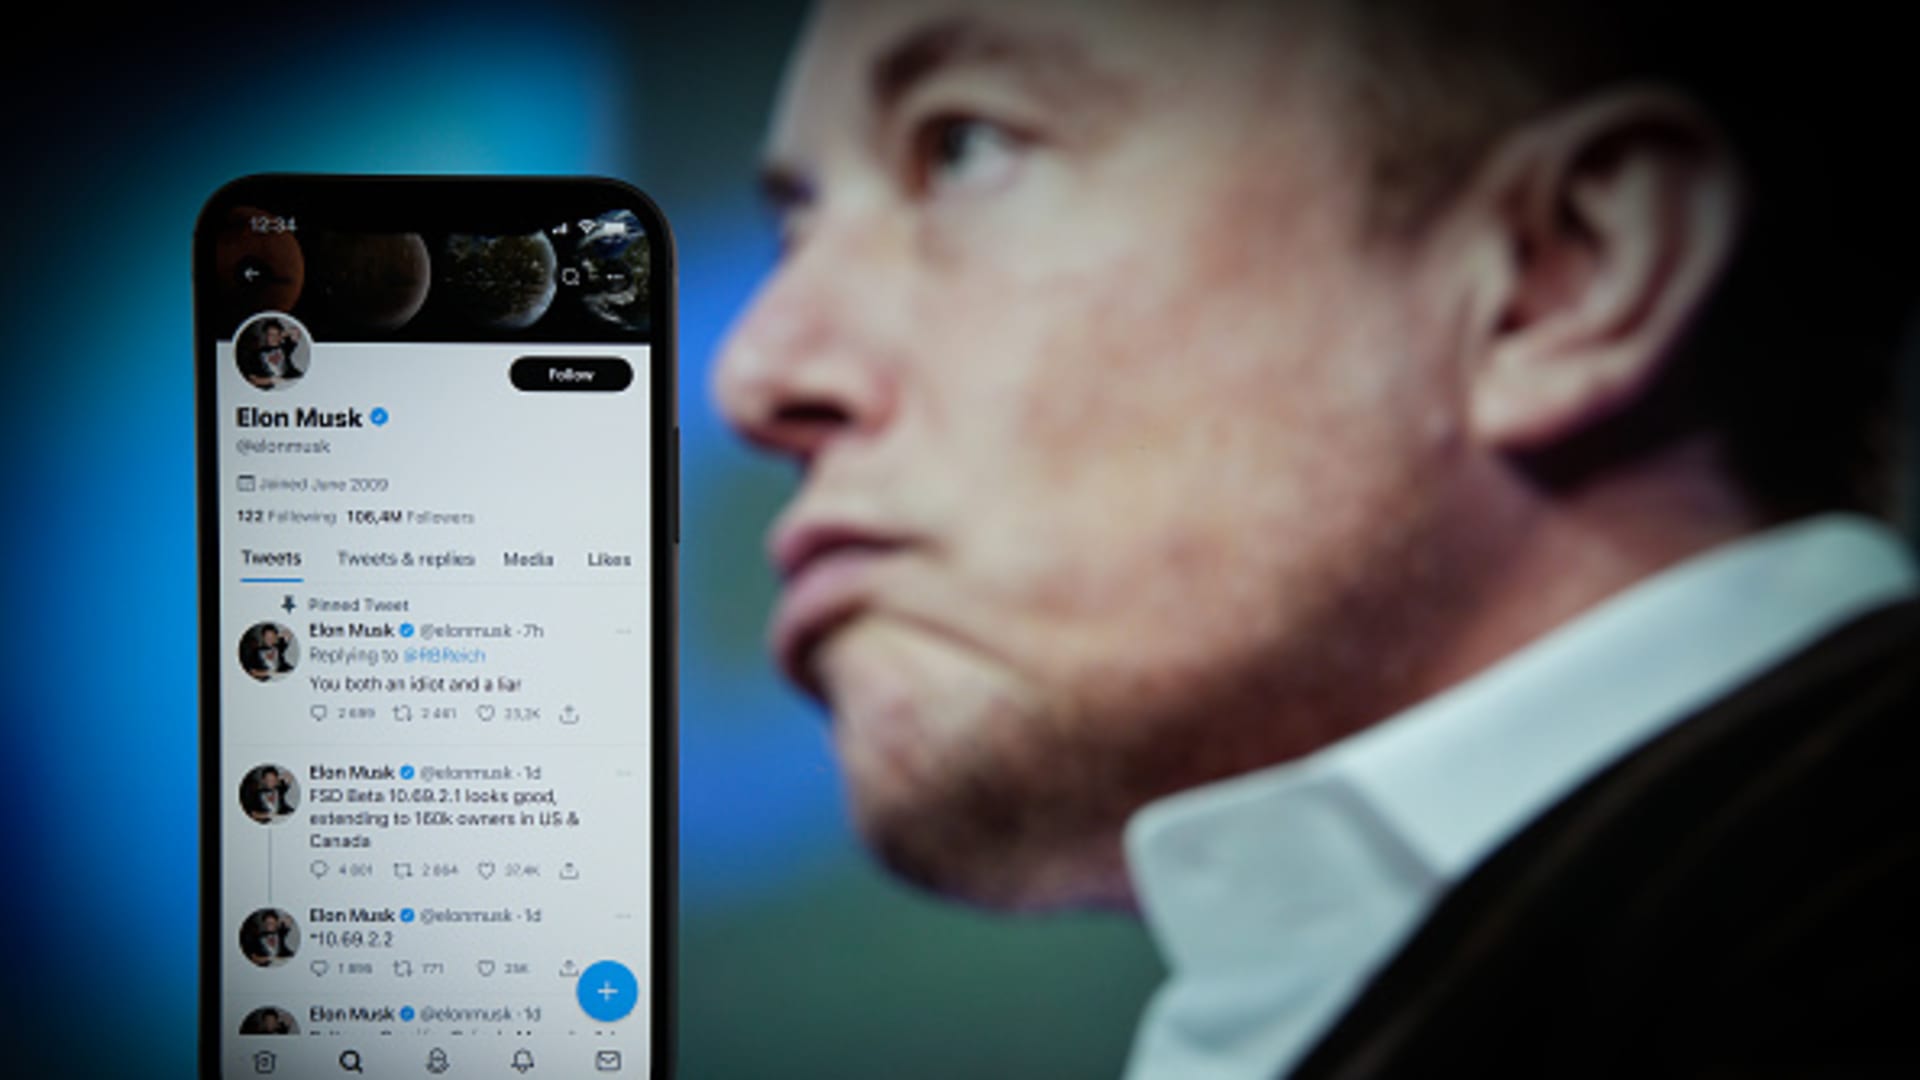 Elon Musk changes course, proposes to go through with Twitter deal at original price: Sources